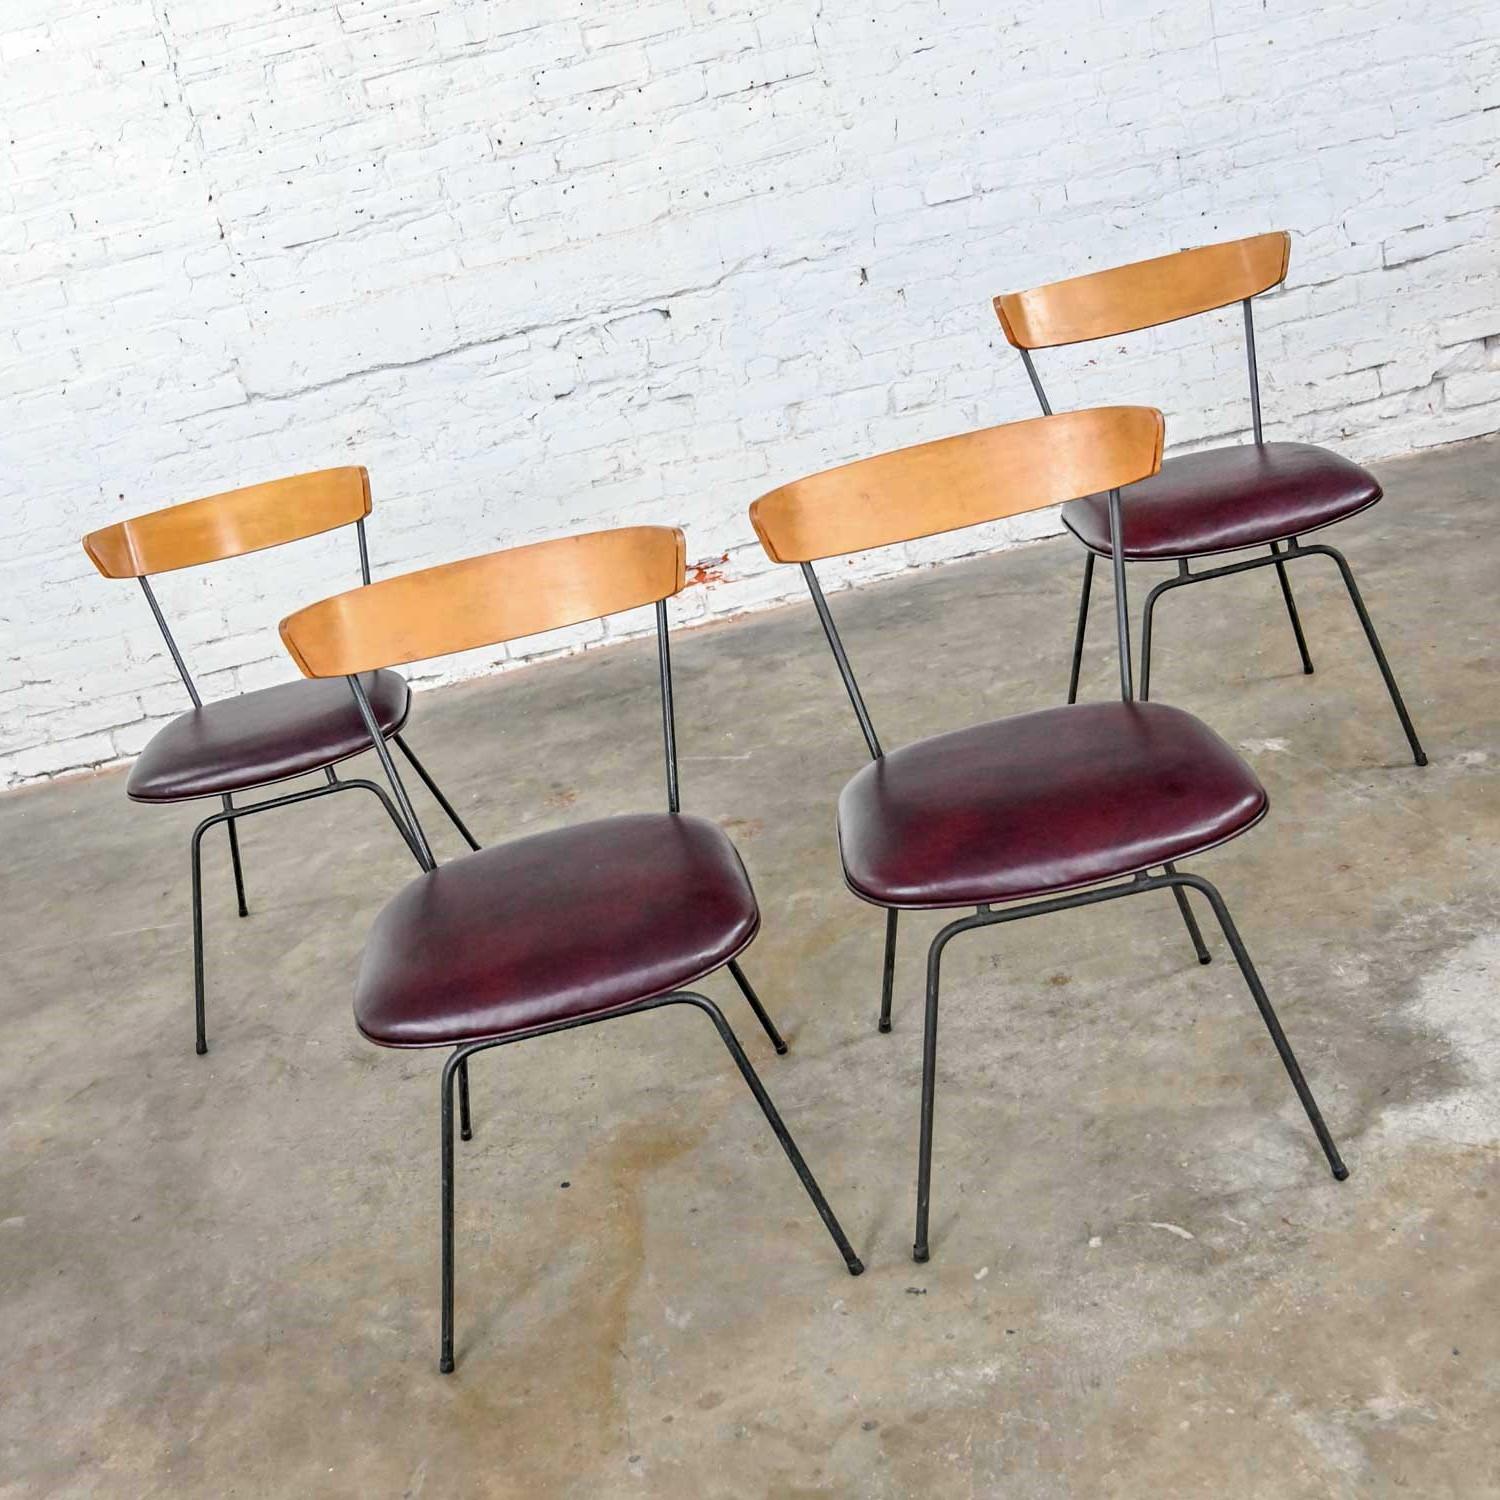 4 MCM Iron & Wood Dining Chairs Attributed to Clifford Pascoe for Modernmasters 1